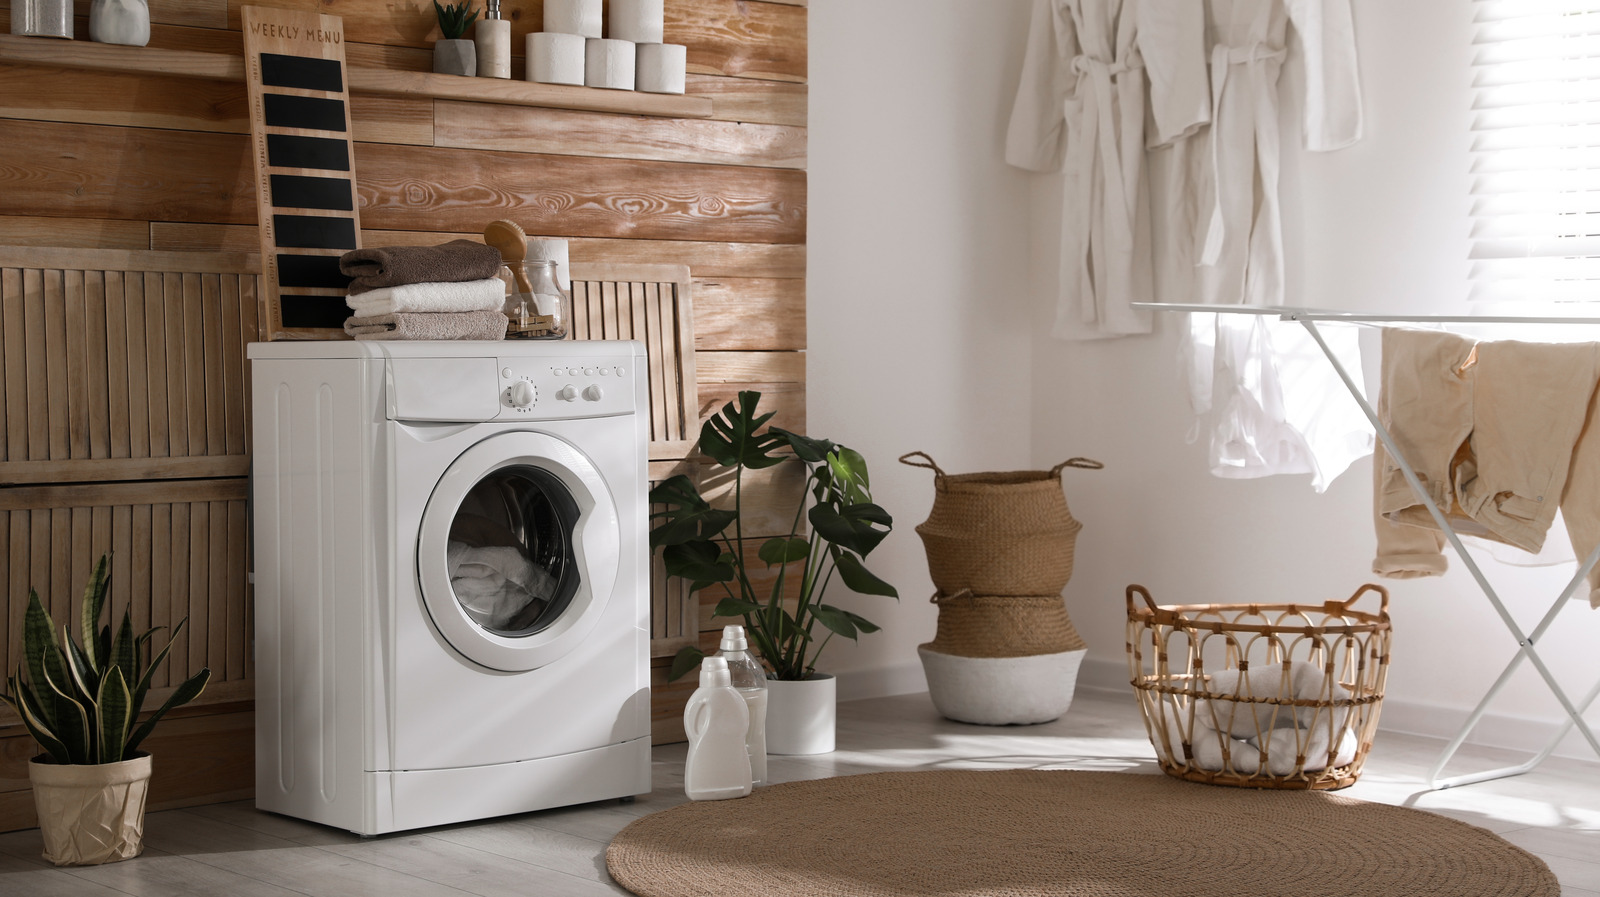 12 Laundry Mistakes That Are Surprisingly Easy To Fix